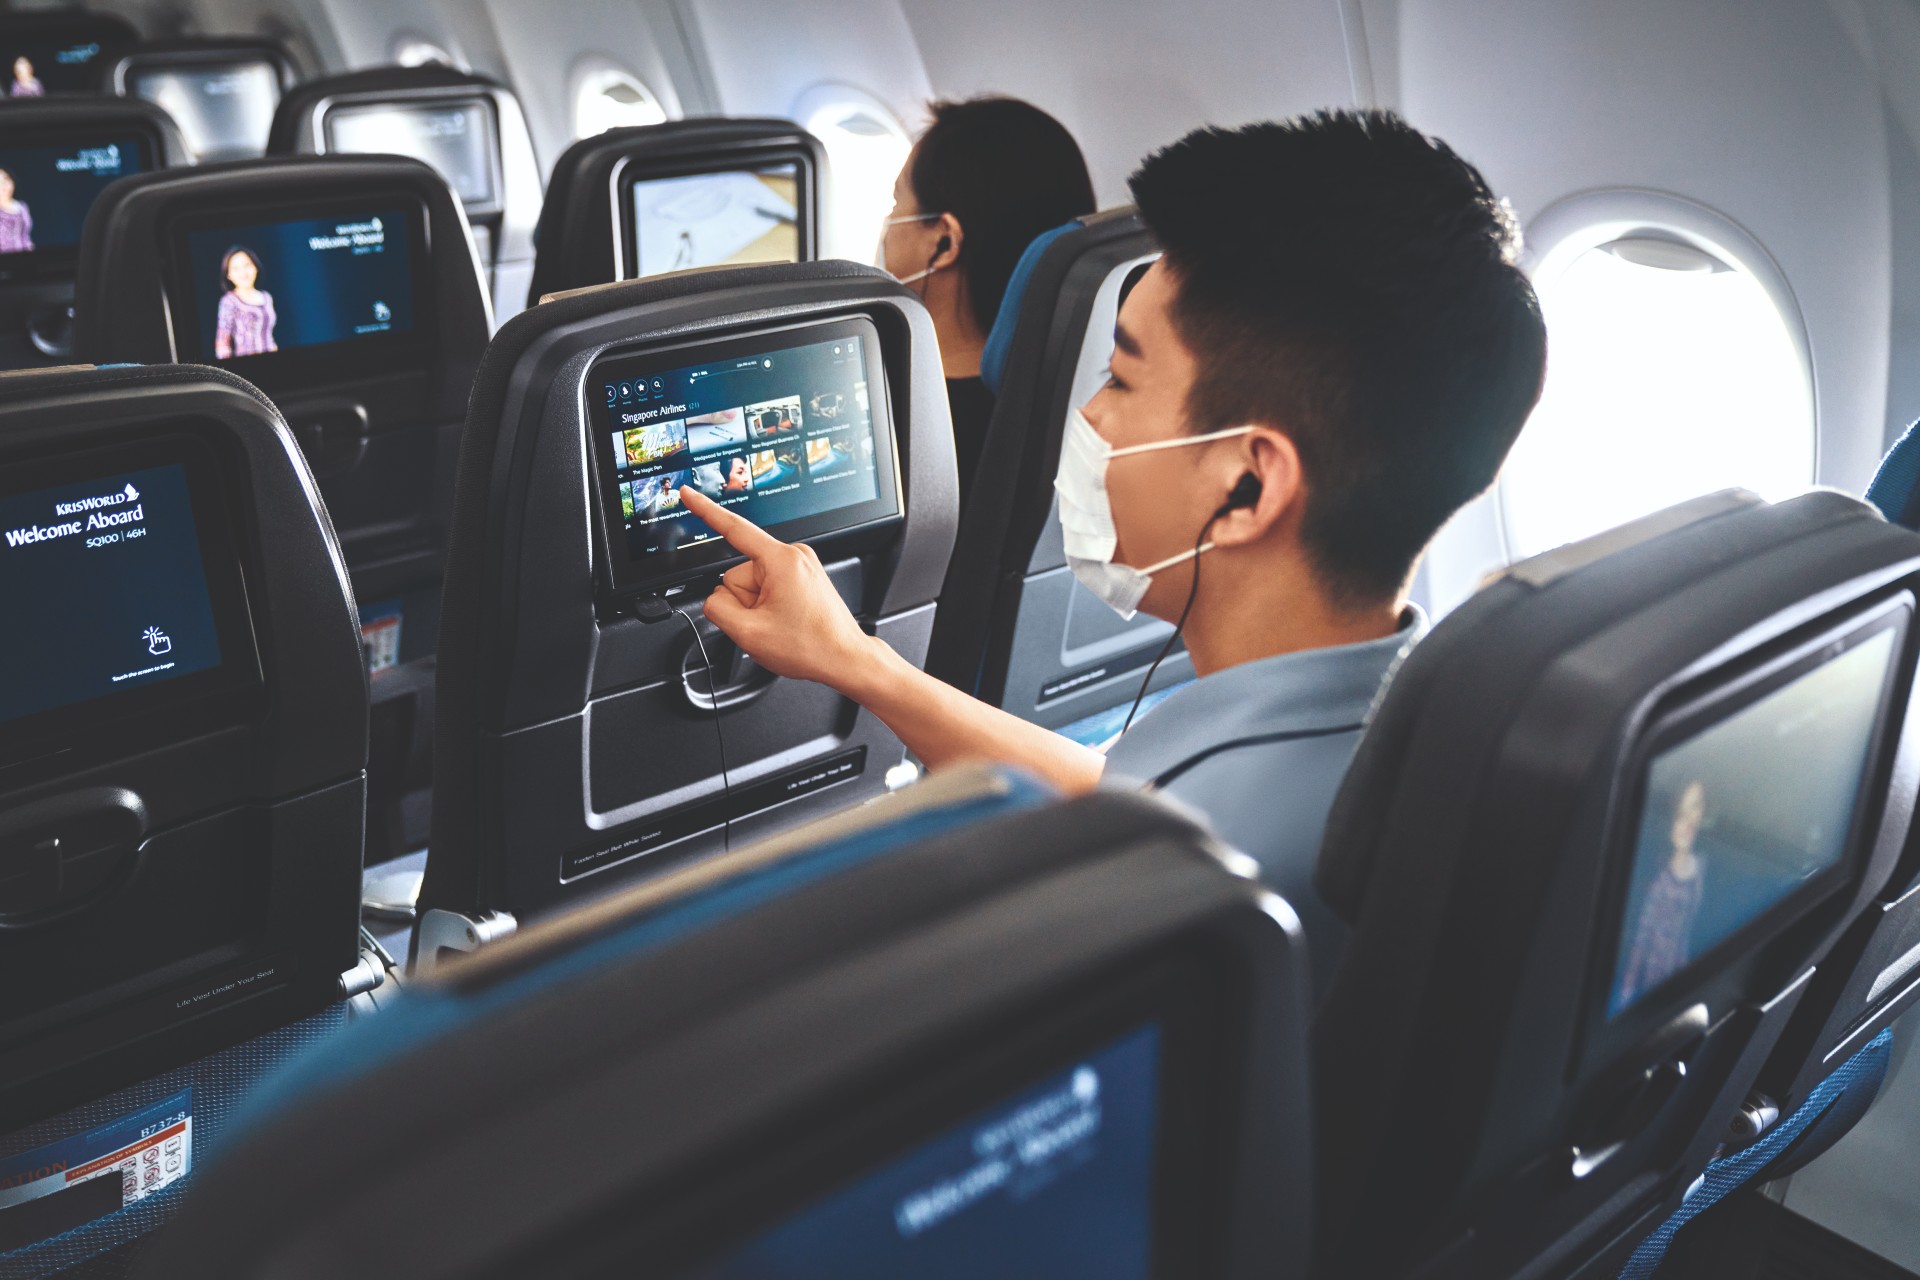 Asian man watching TV on Singapore Airlines